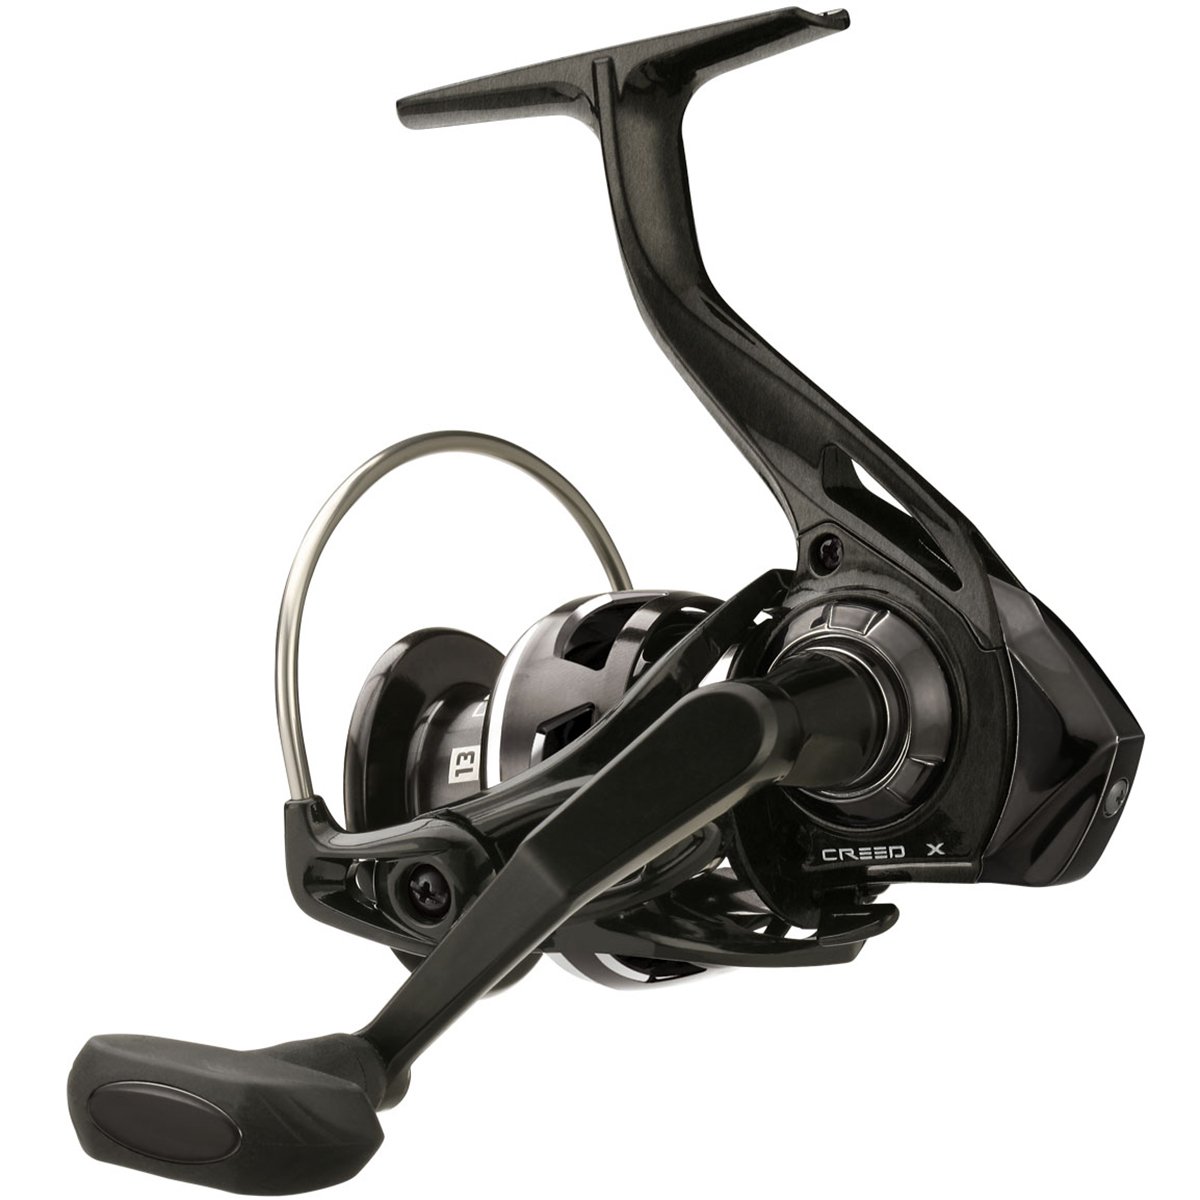 13 Fishing Creed X - Spinning Reel - X3000 - BRAND NEW SEALED